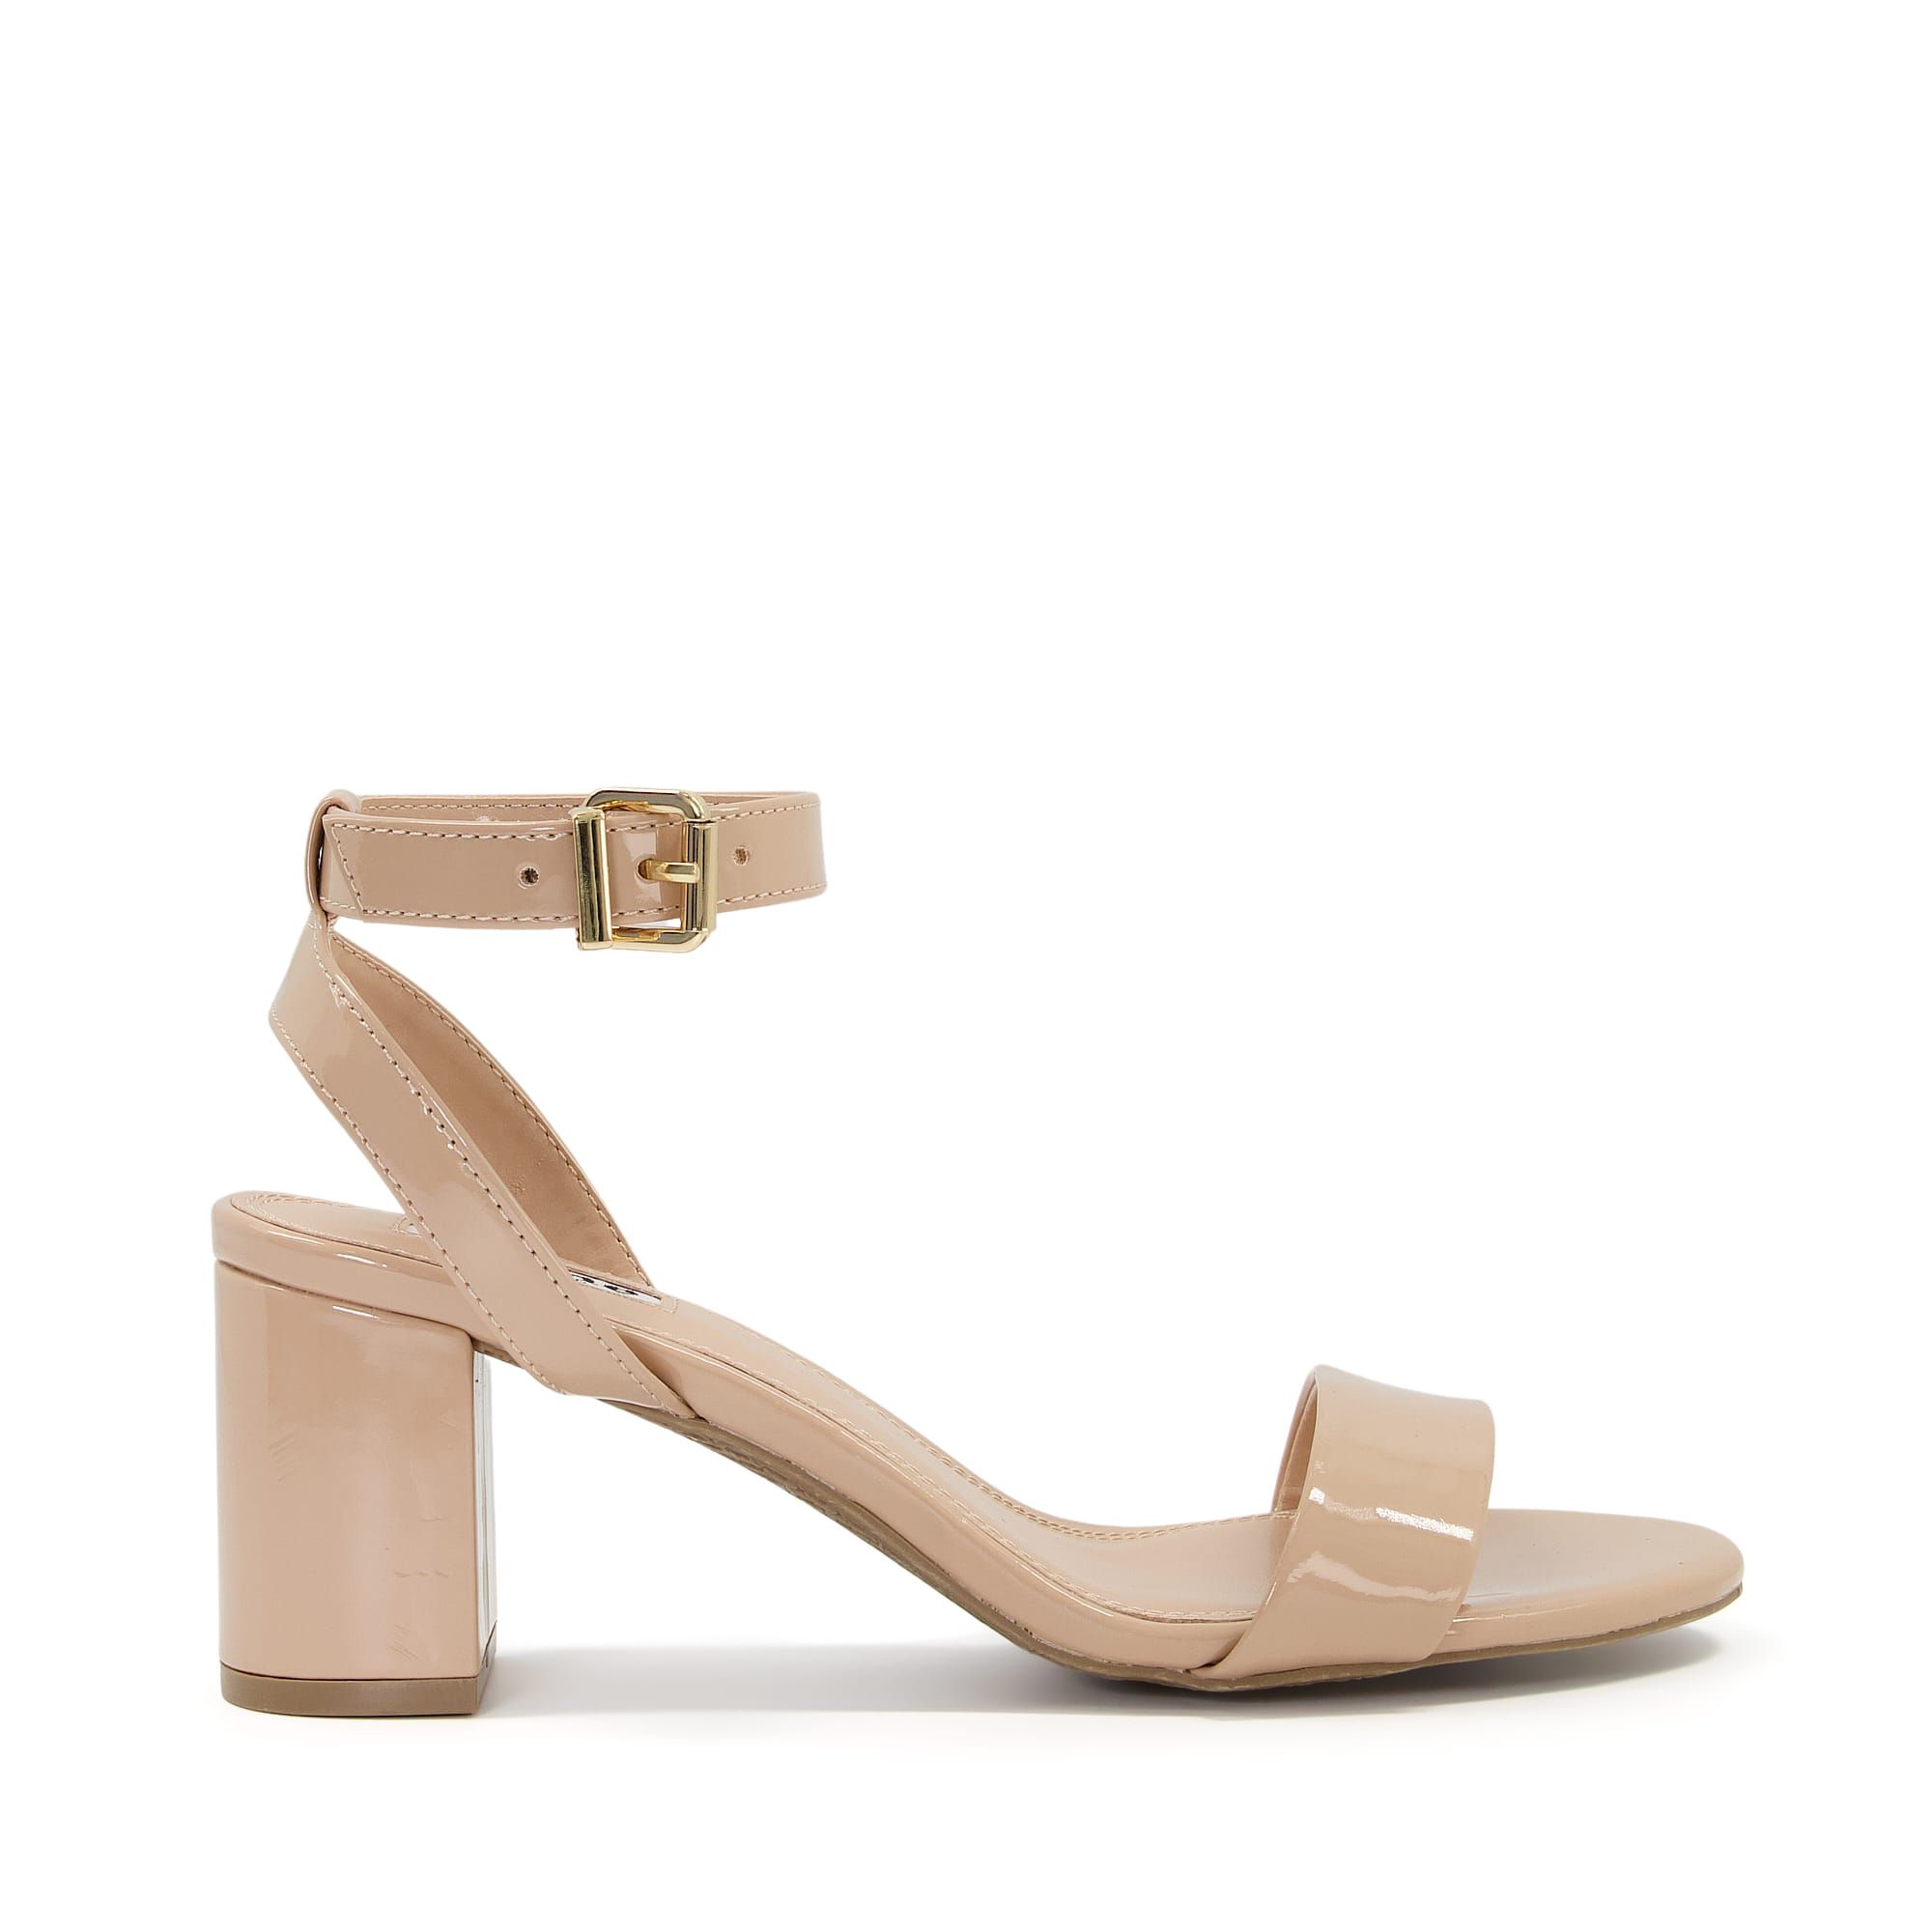 Meet your new wear-with-everything style. Comfortable and versatile, these sandals feature an adjustable ankle strap and rest on a block heel.